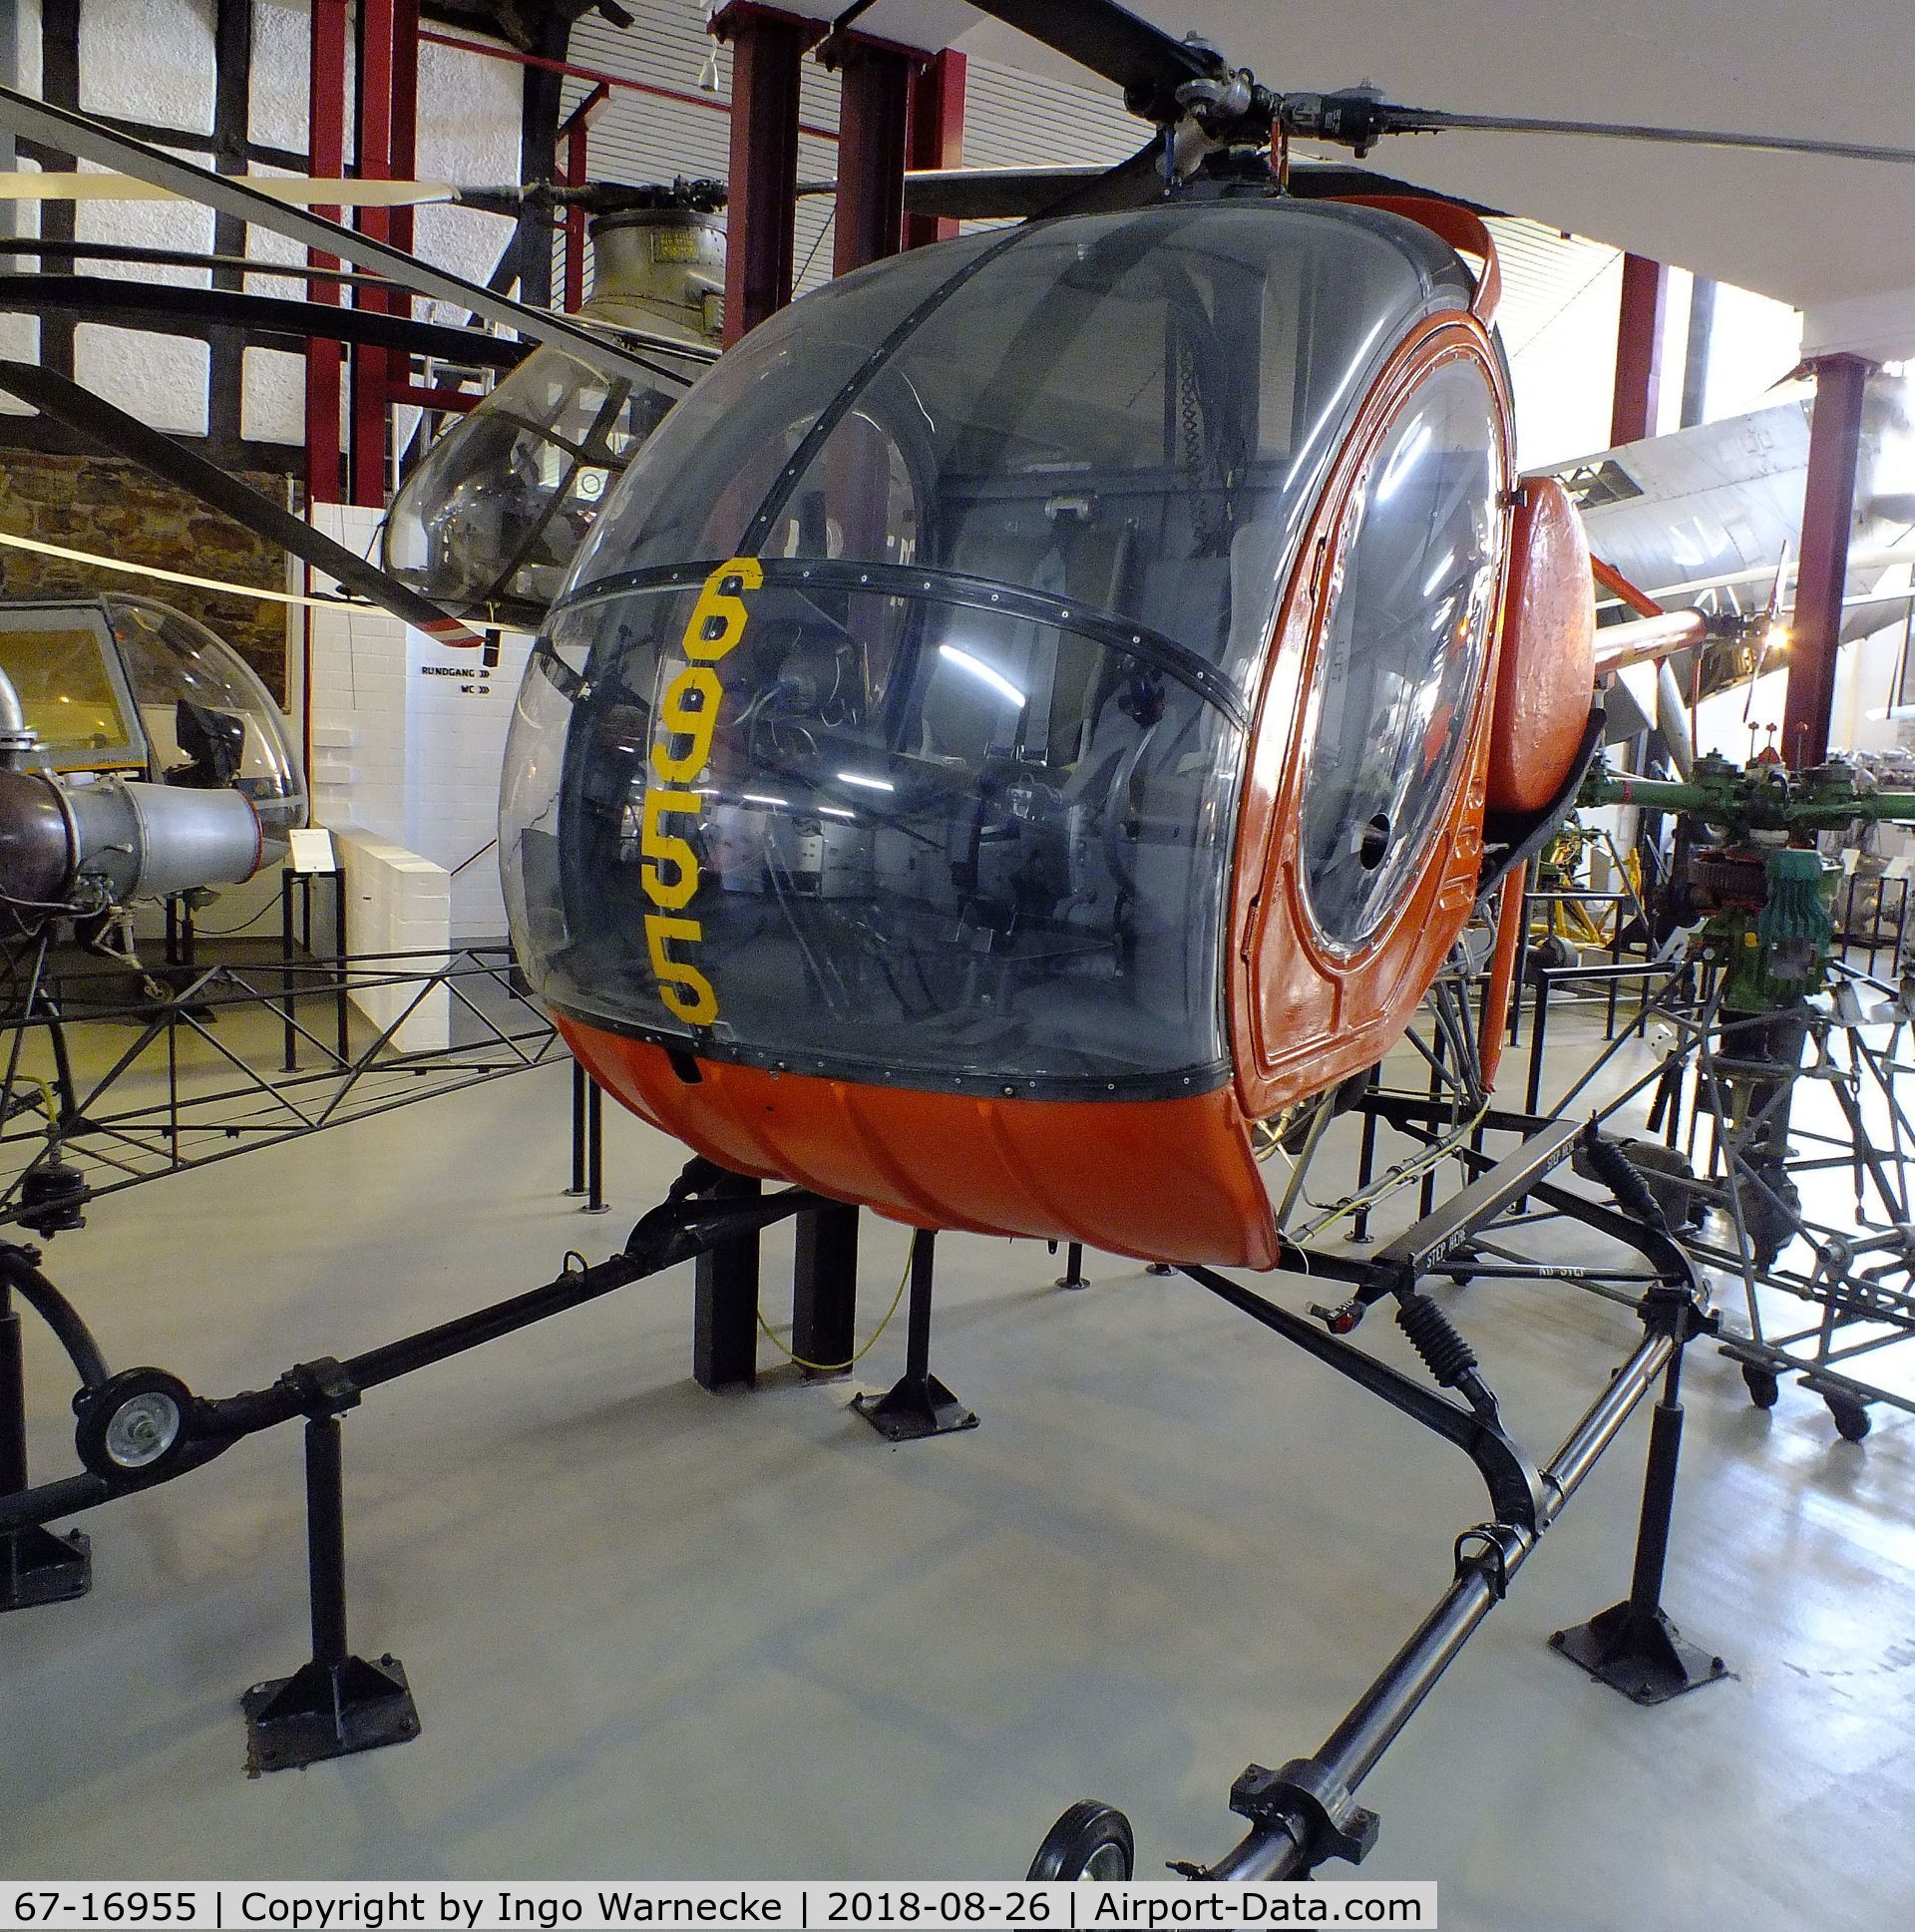 67-16955, 1967 Hughes TH-55A Osage C/N 19-1062, Hughes TH-55A Osage at the Hubschraubermuseum (helicopter museum), Bückeburg